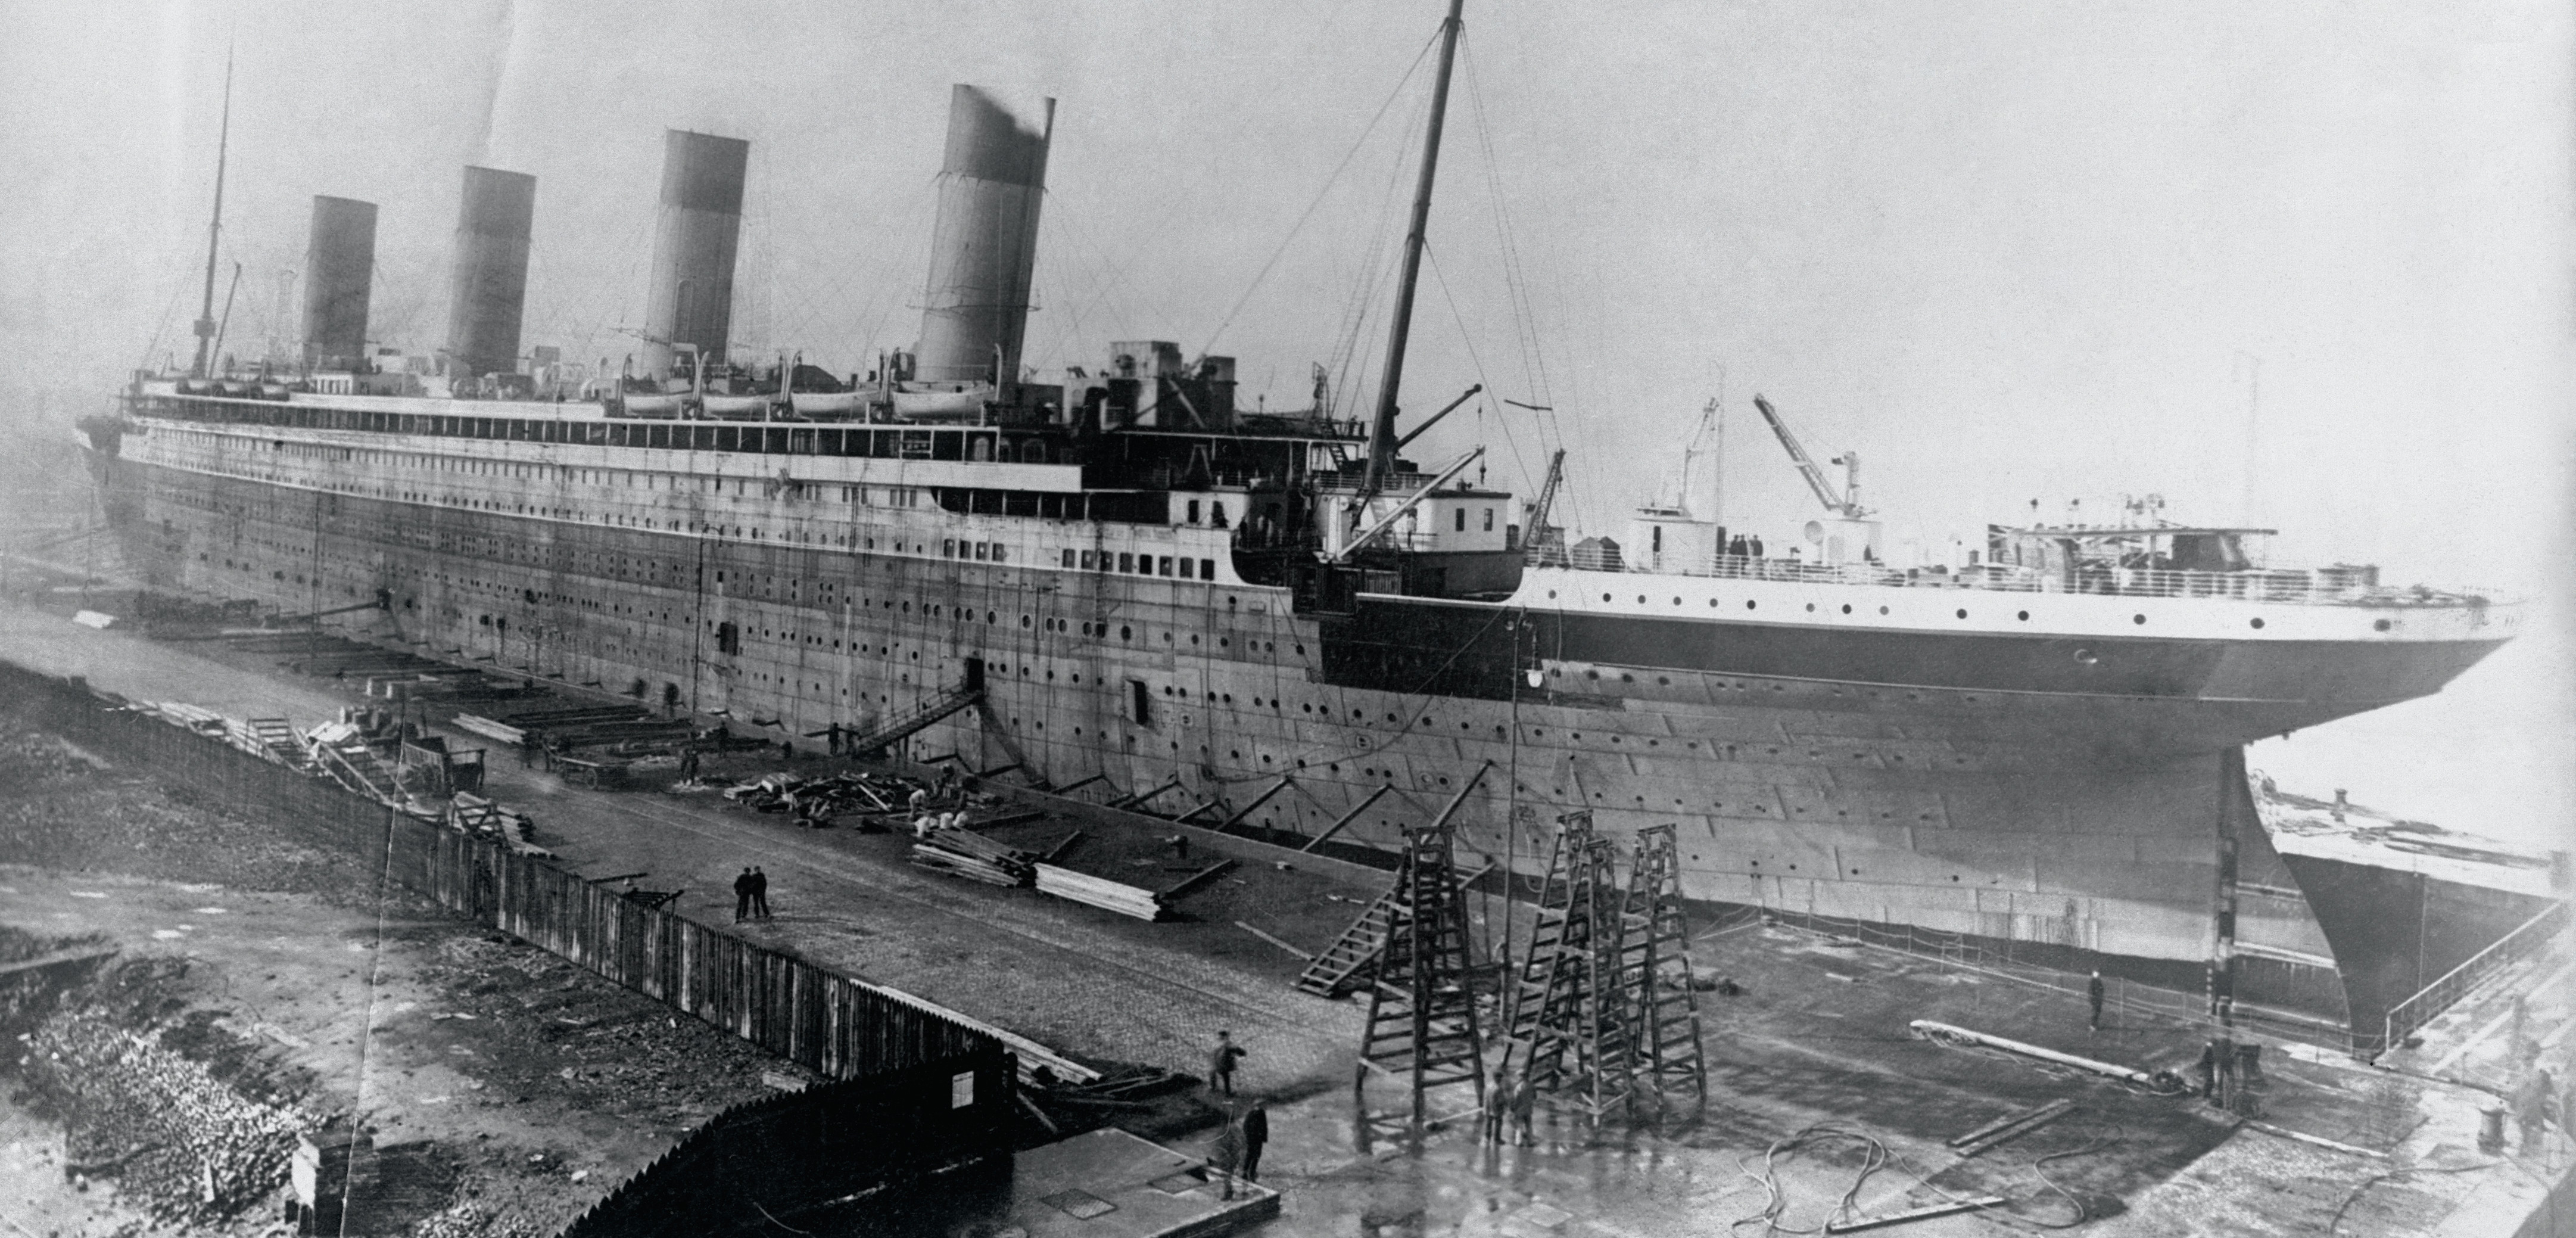 Workers build the S.S. Olympic, one of the Titanic’s sister ships. Photo by Bettmann/Corbis